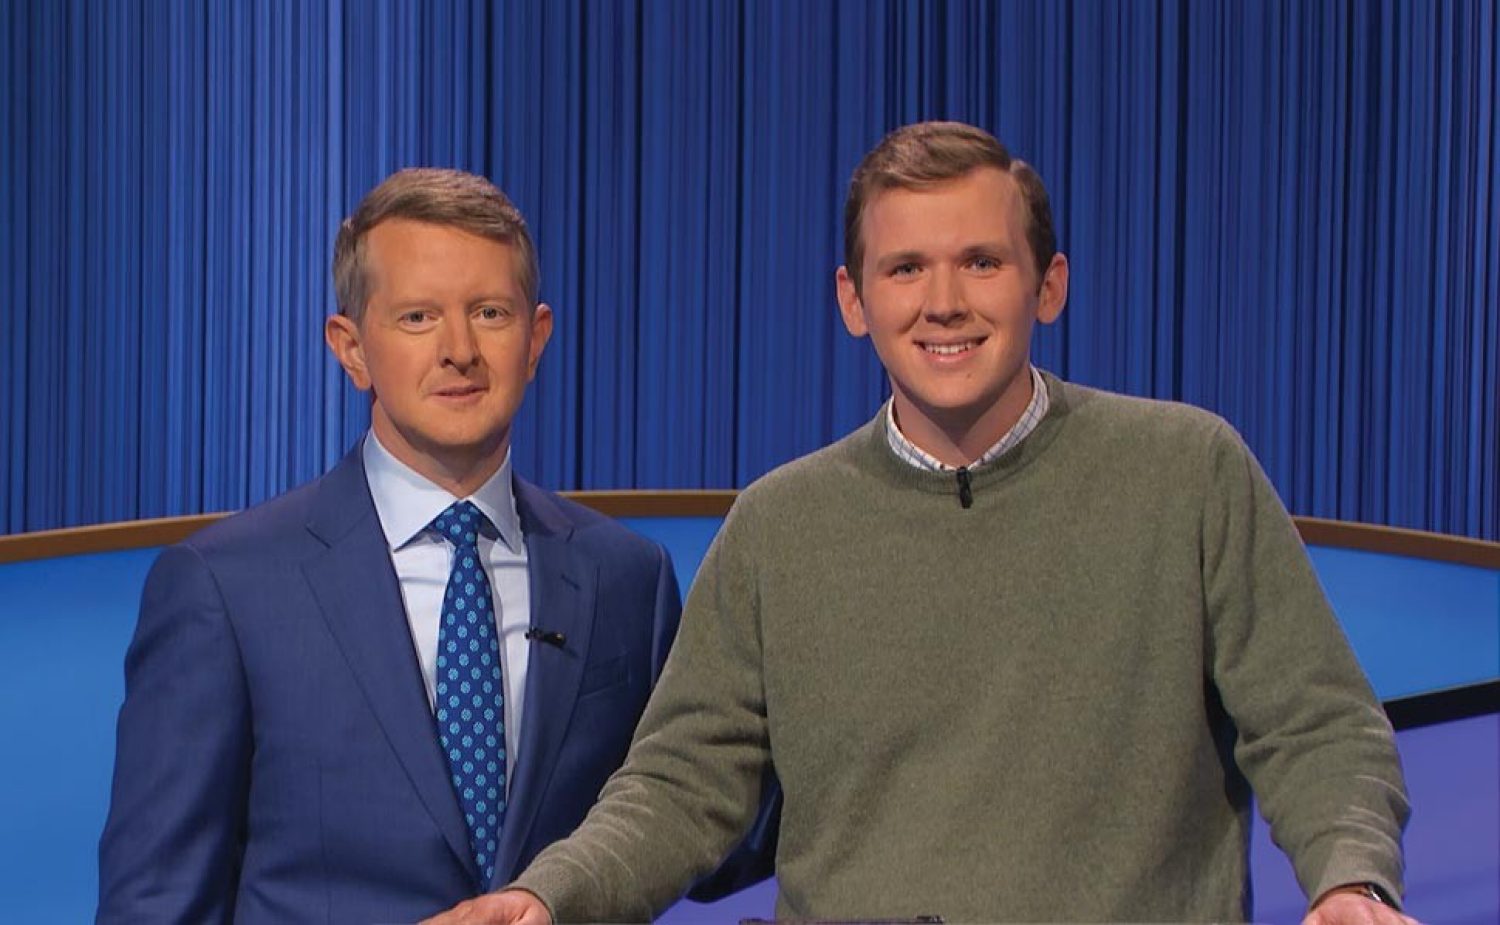 Sean McShane with Ken Jennings on the set of Jeopardy